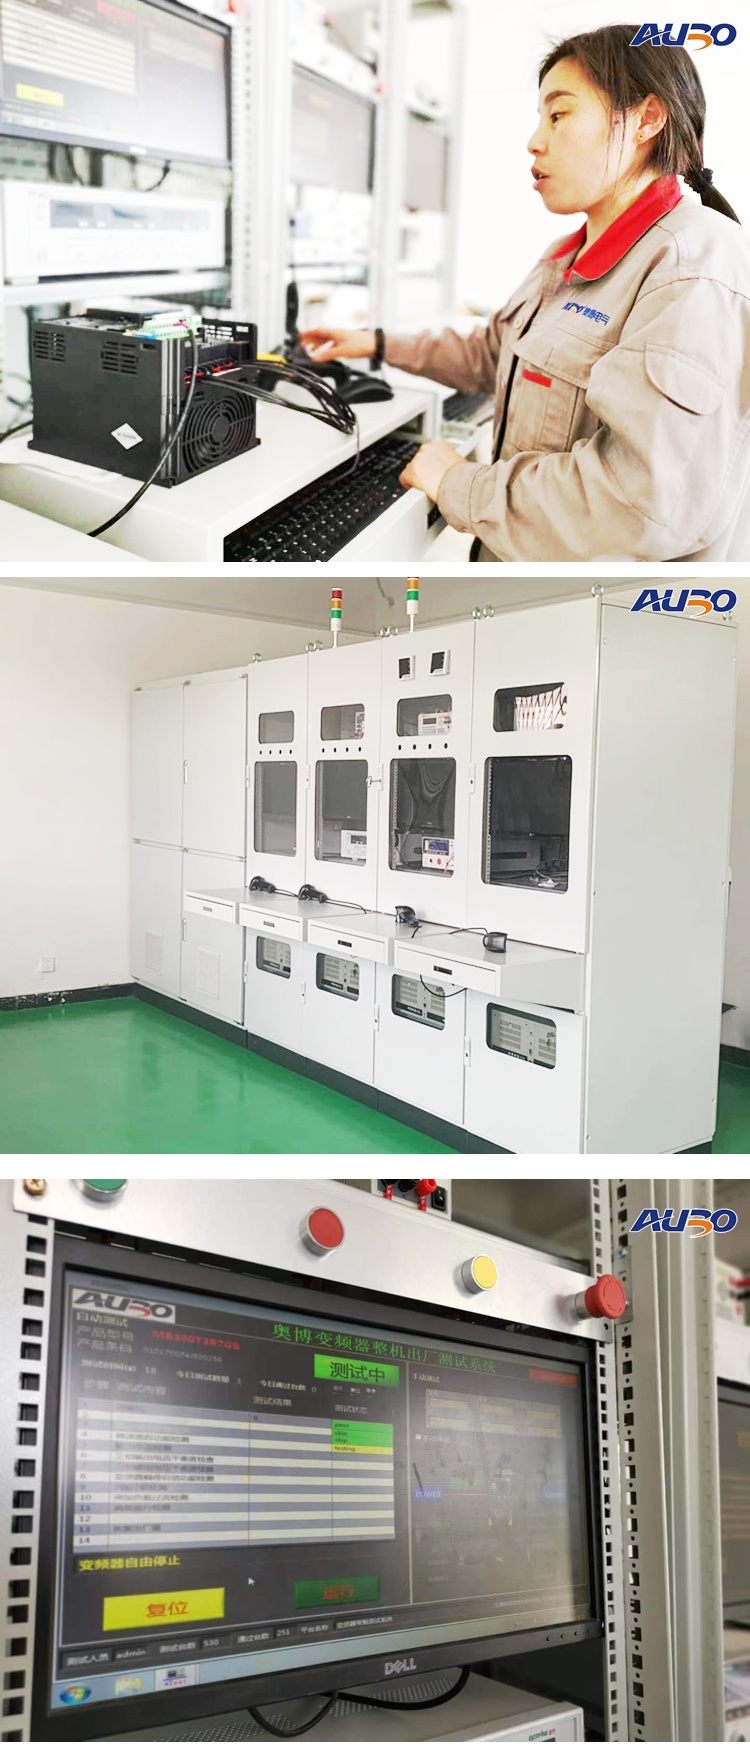 380V 0.75-315kw High Performance Factory Price Frequency Inverter VFD